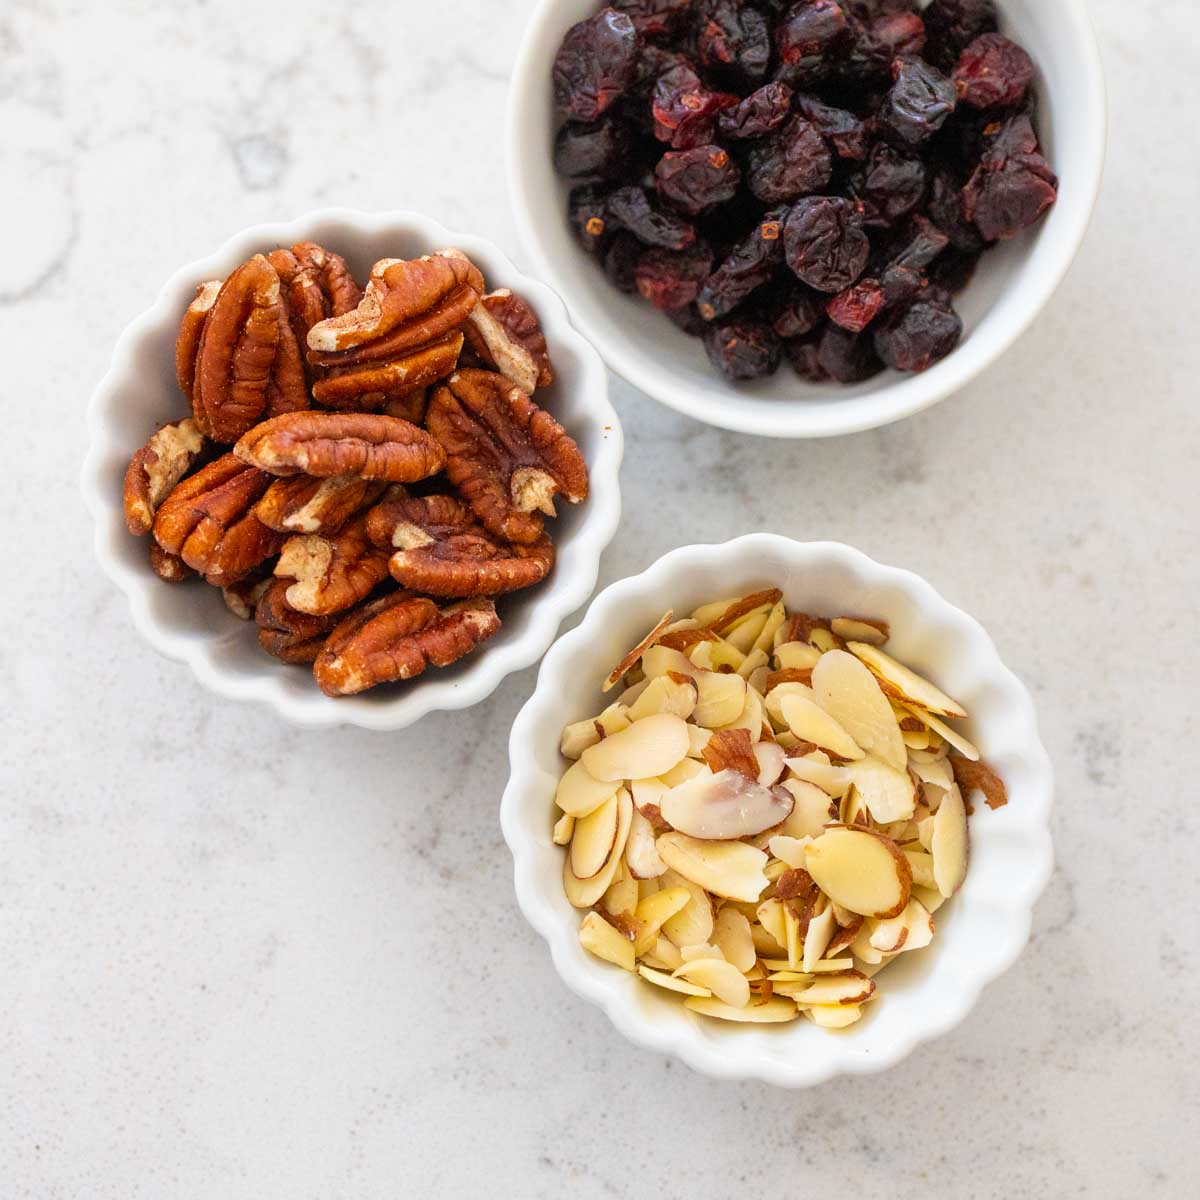 Tiny prep bowls are filled with dried fruit and nuts.